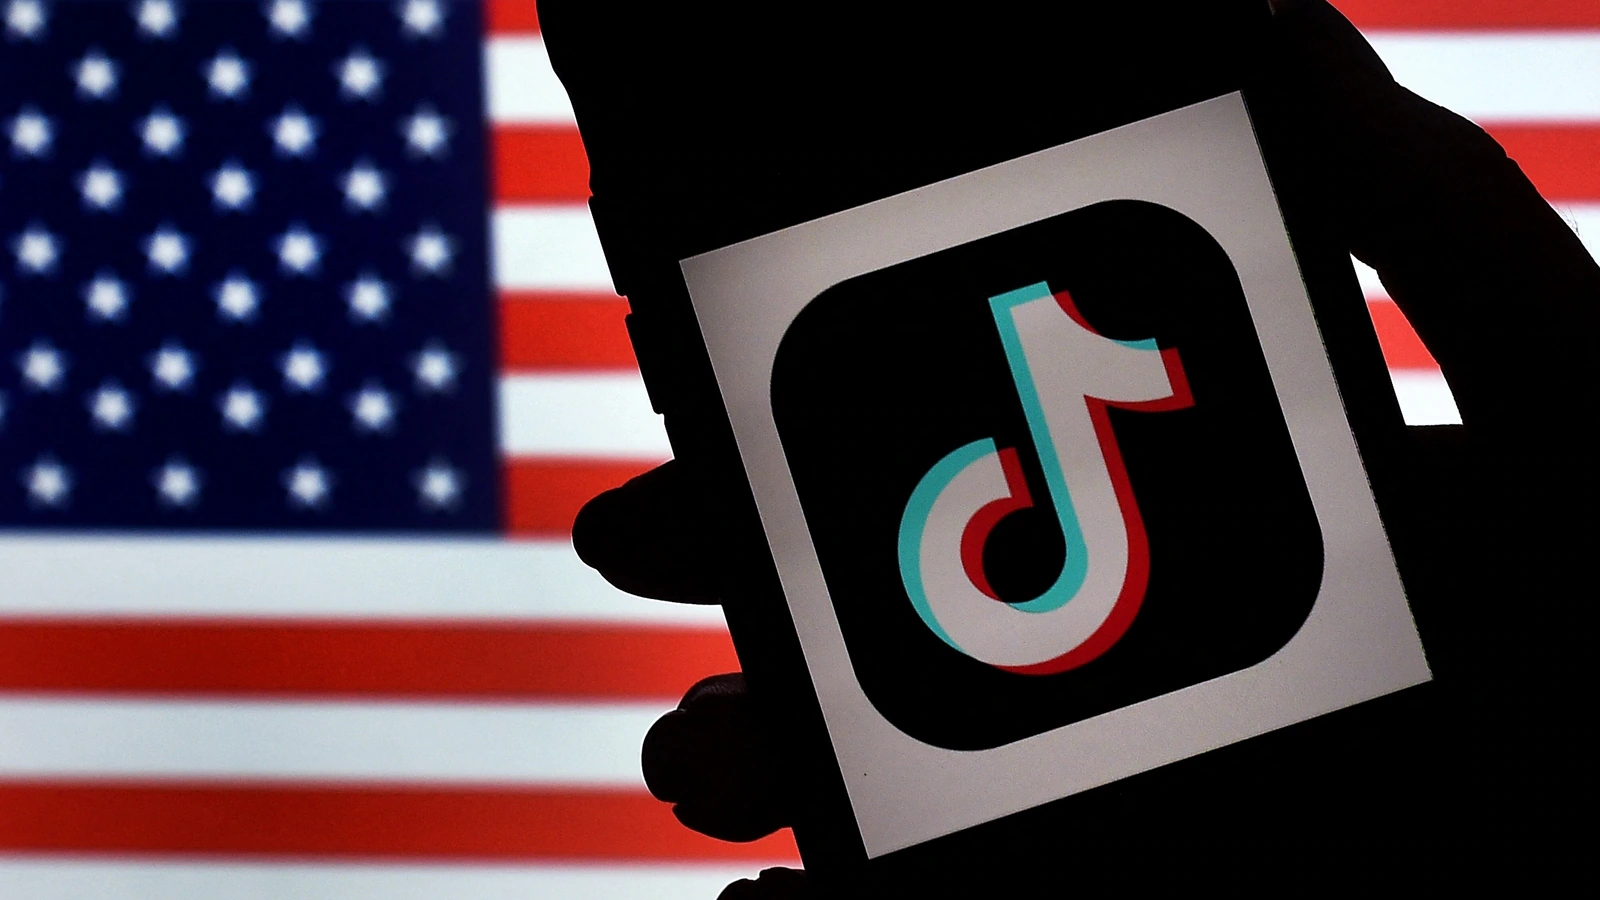 TikTok Ban Is Likely As the House Fast-Tracks the Revised Bill With Senate Support